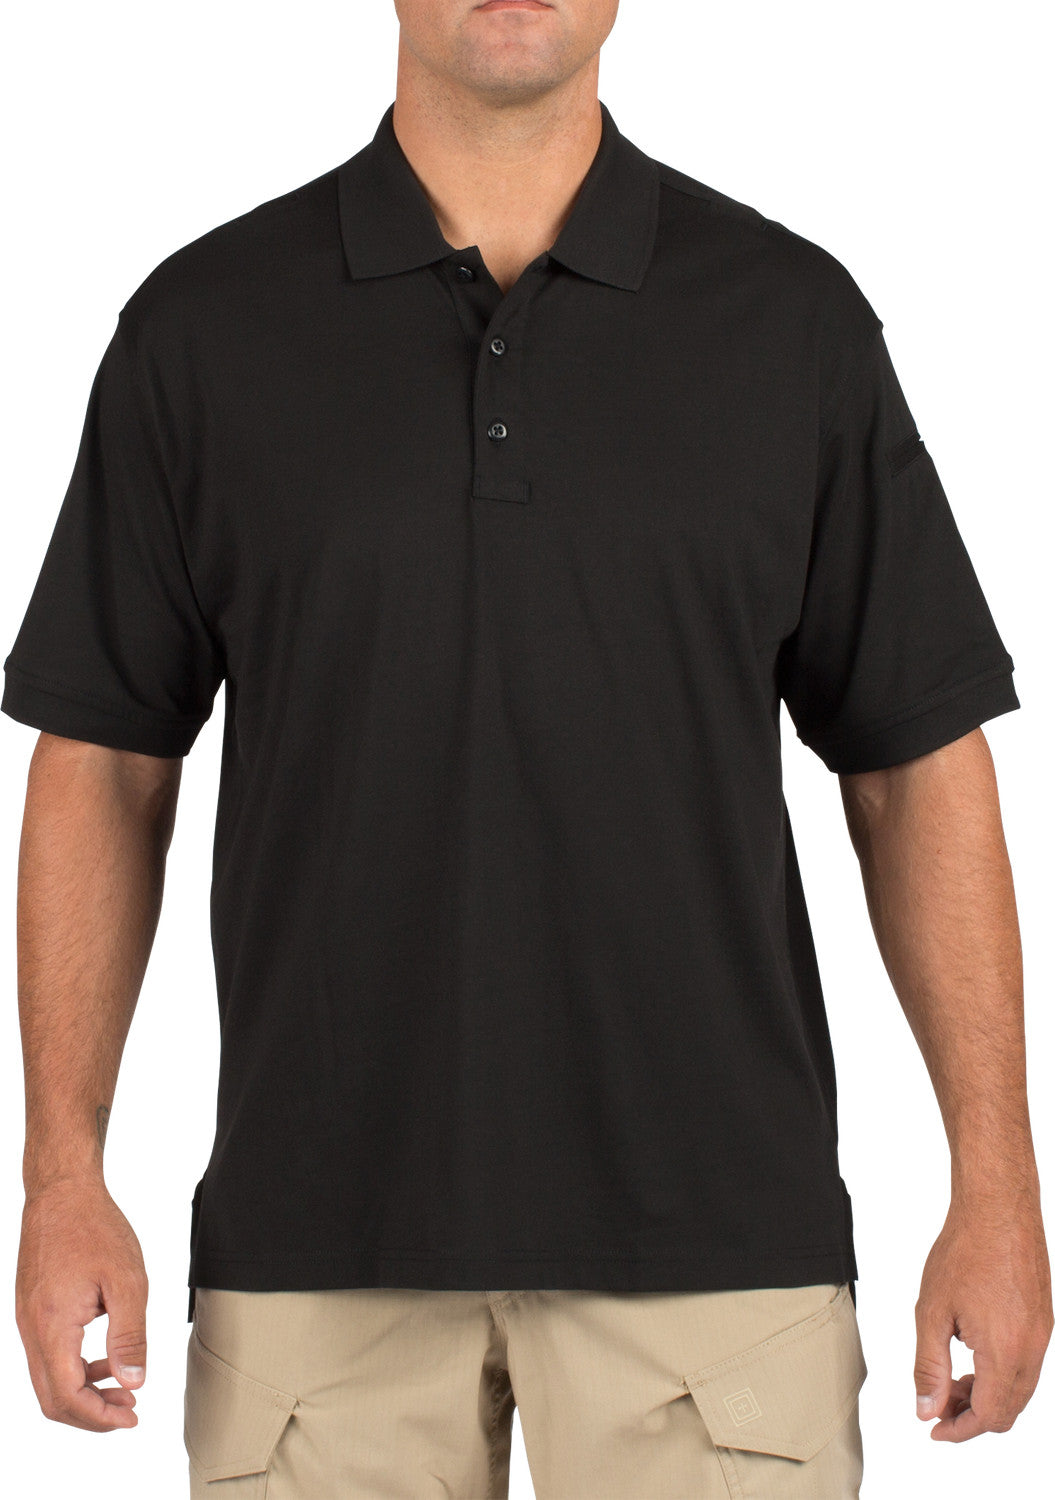 5.11 Tactical Jersey Short Sleeve Polo (71182) | The Fire Center | The Fire Store | The first choice in casual uniform wear for law enforcement and fire professionals across the nation and around the world, the Short Sleeve Tactical Polo is designed to meet dress code and functionality requirements for first responders across a broad range of disciplines. 